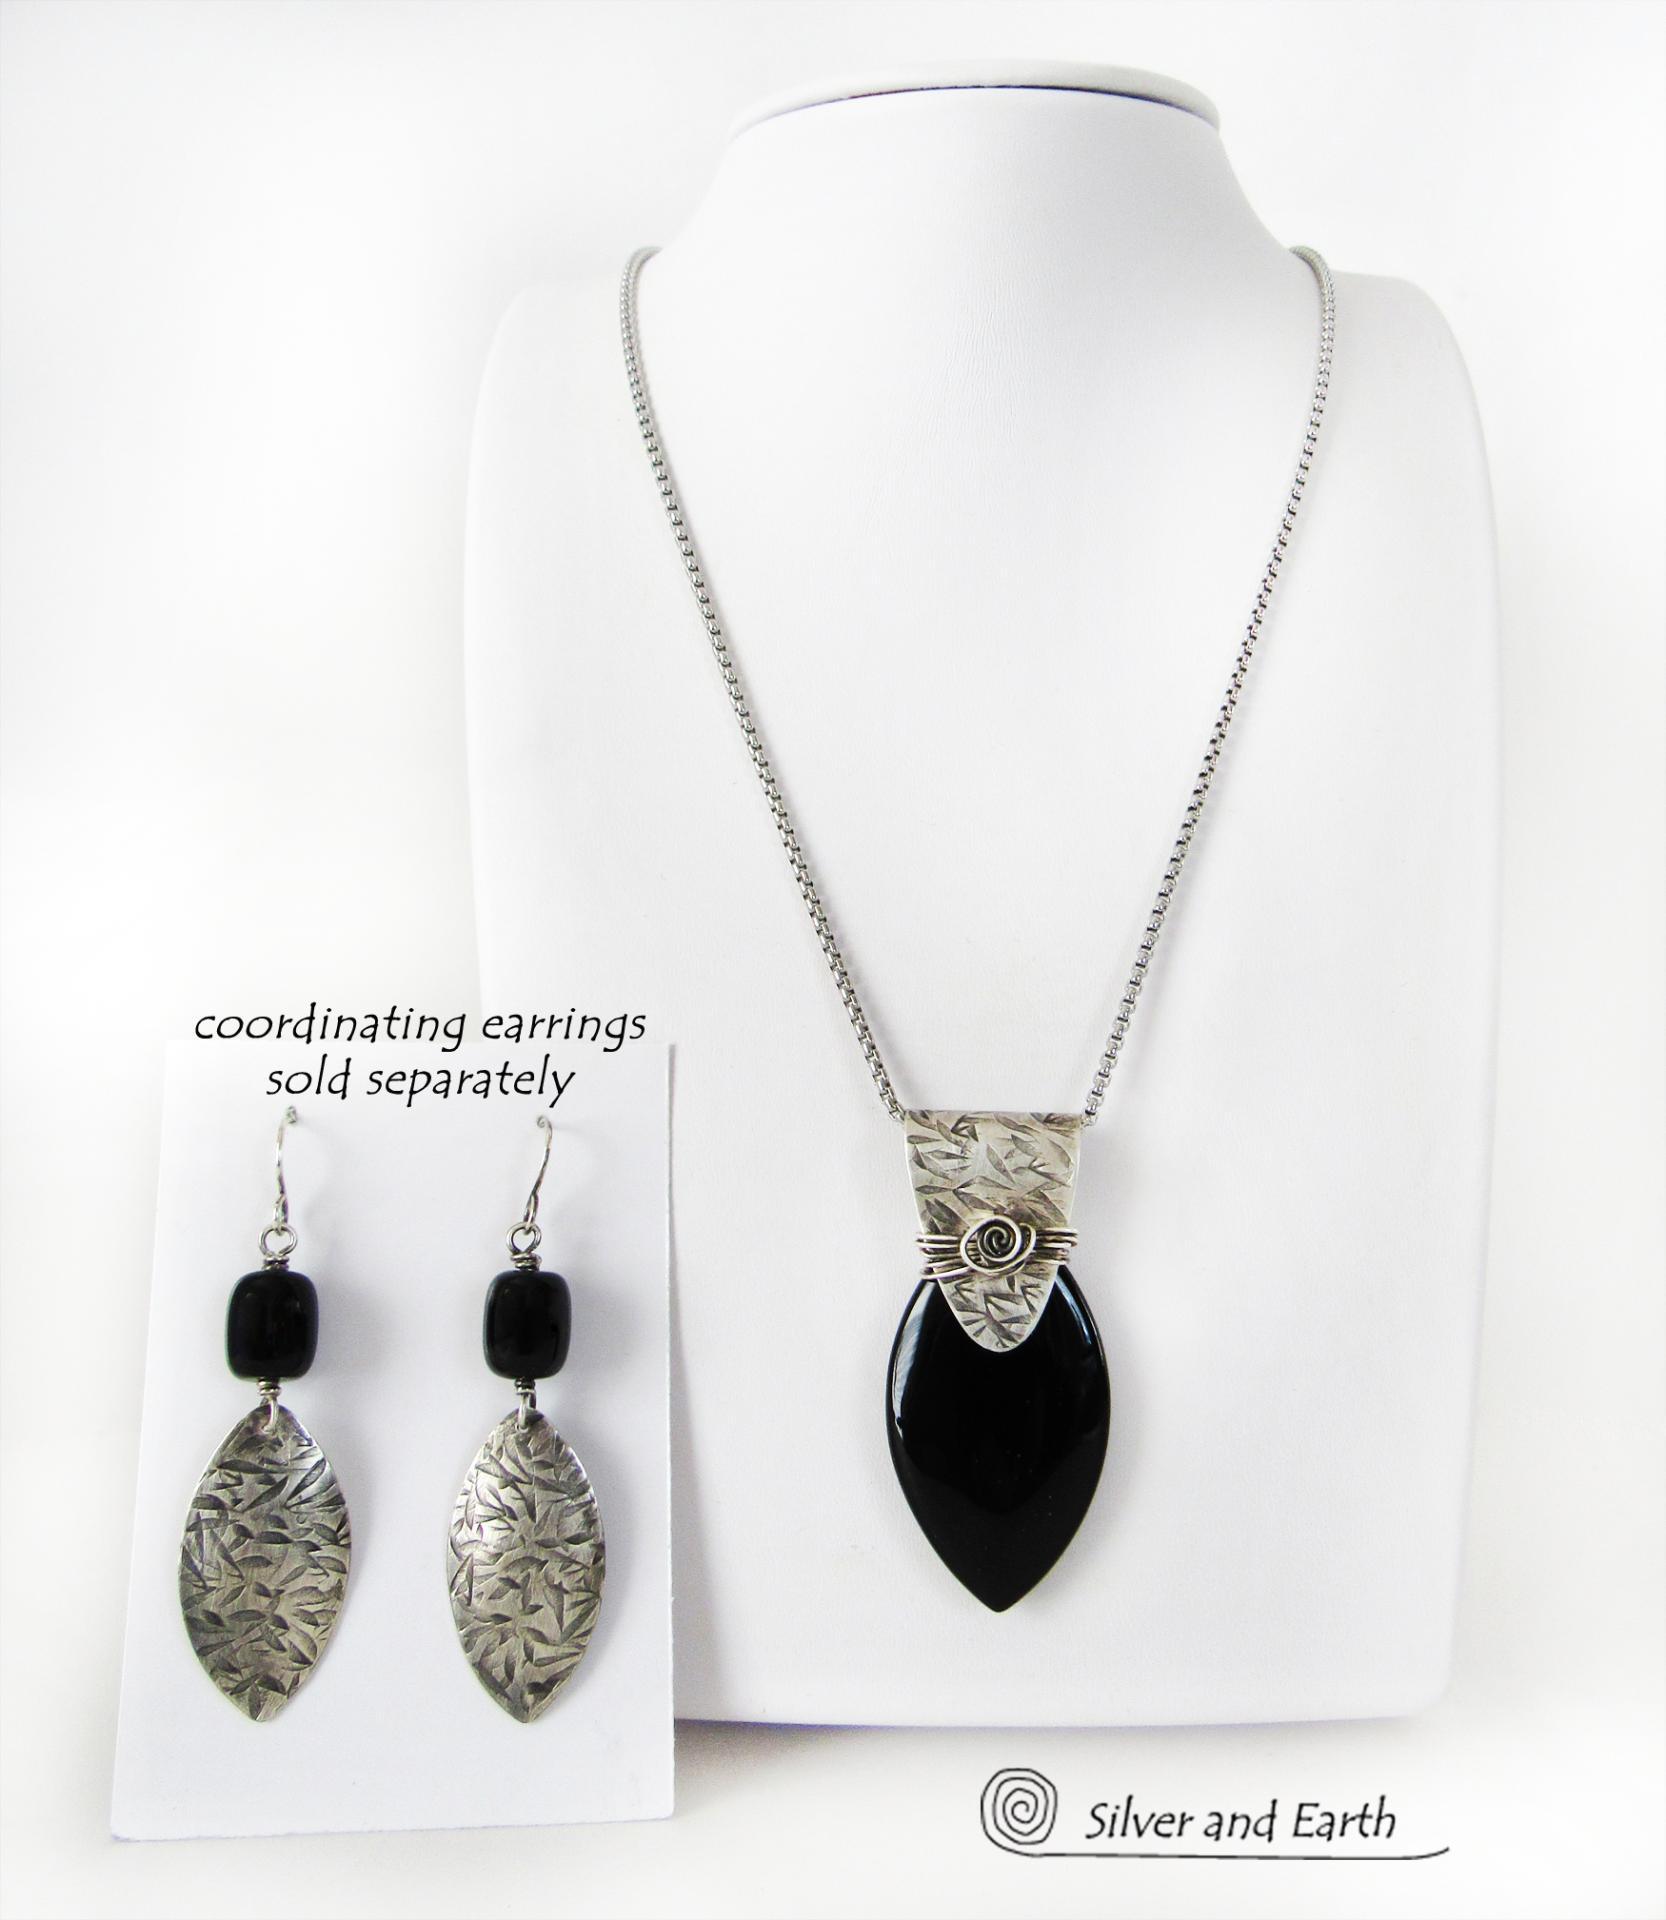 Sterling Silver & Black Onyx Pendant Necklace - Handcrafted Artisan & Gemstone Jewelry